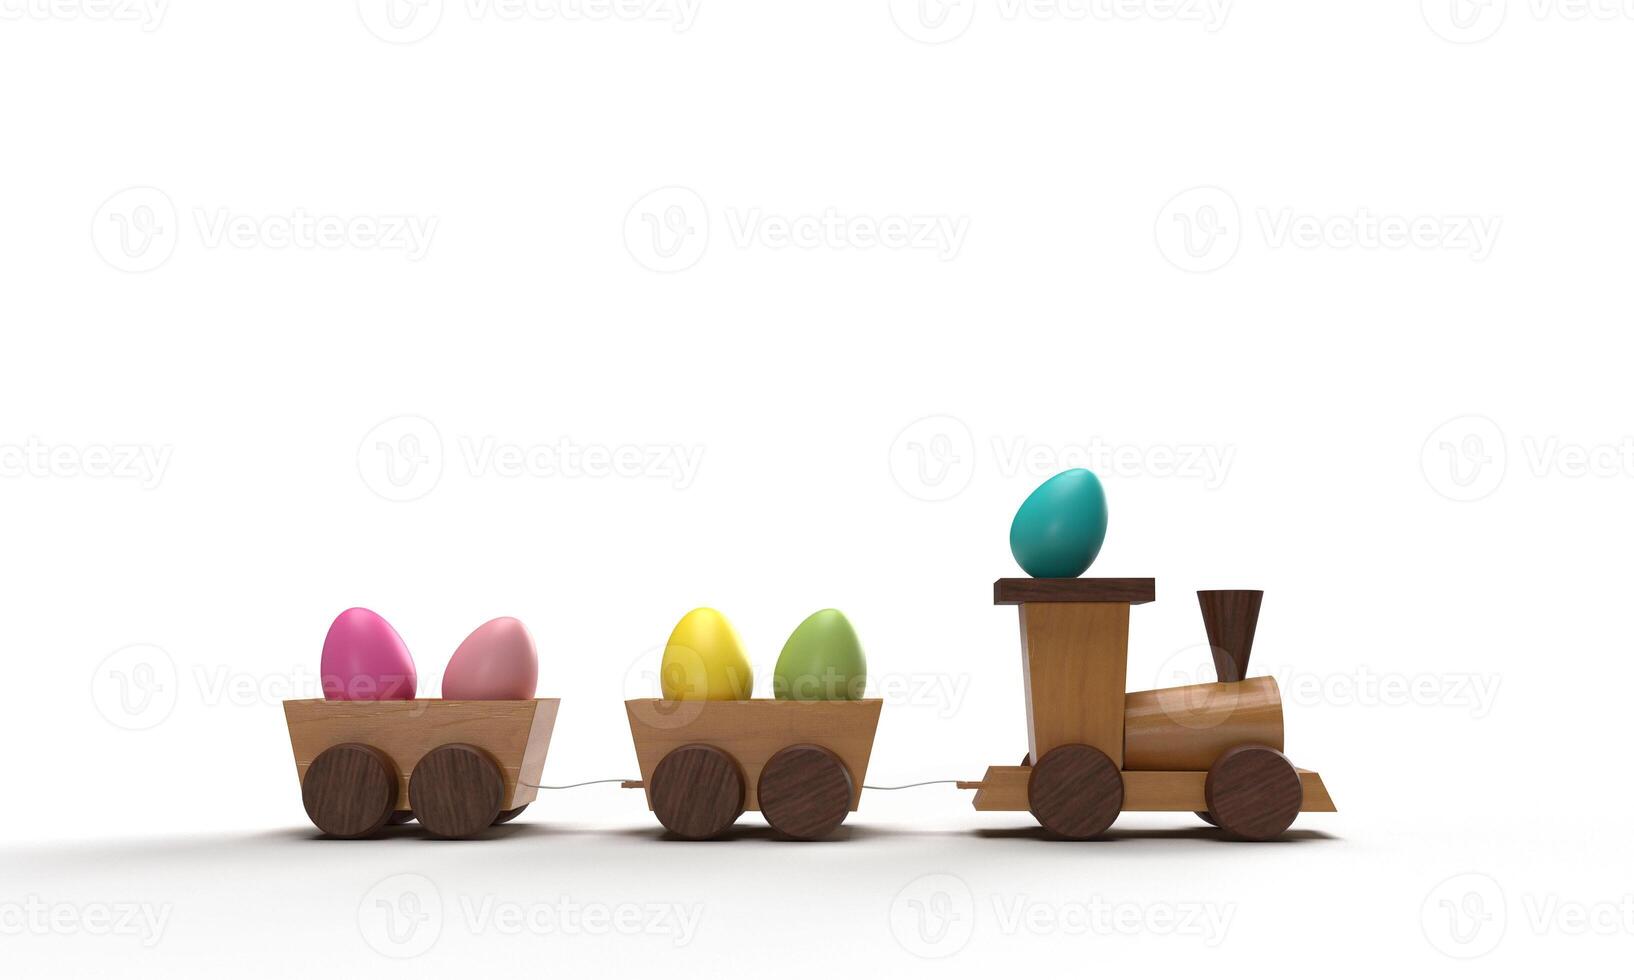 Train toy egg colourful play symbol decoration ornament happy easter egg march april month celebration festival holiday spring time child kid season food greeting pink yellow blue green character photo